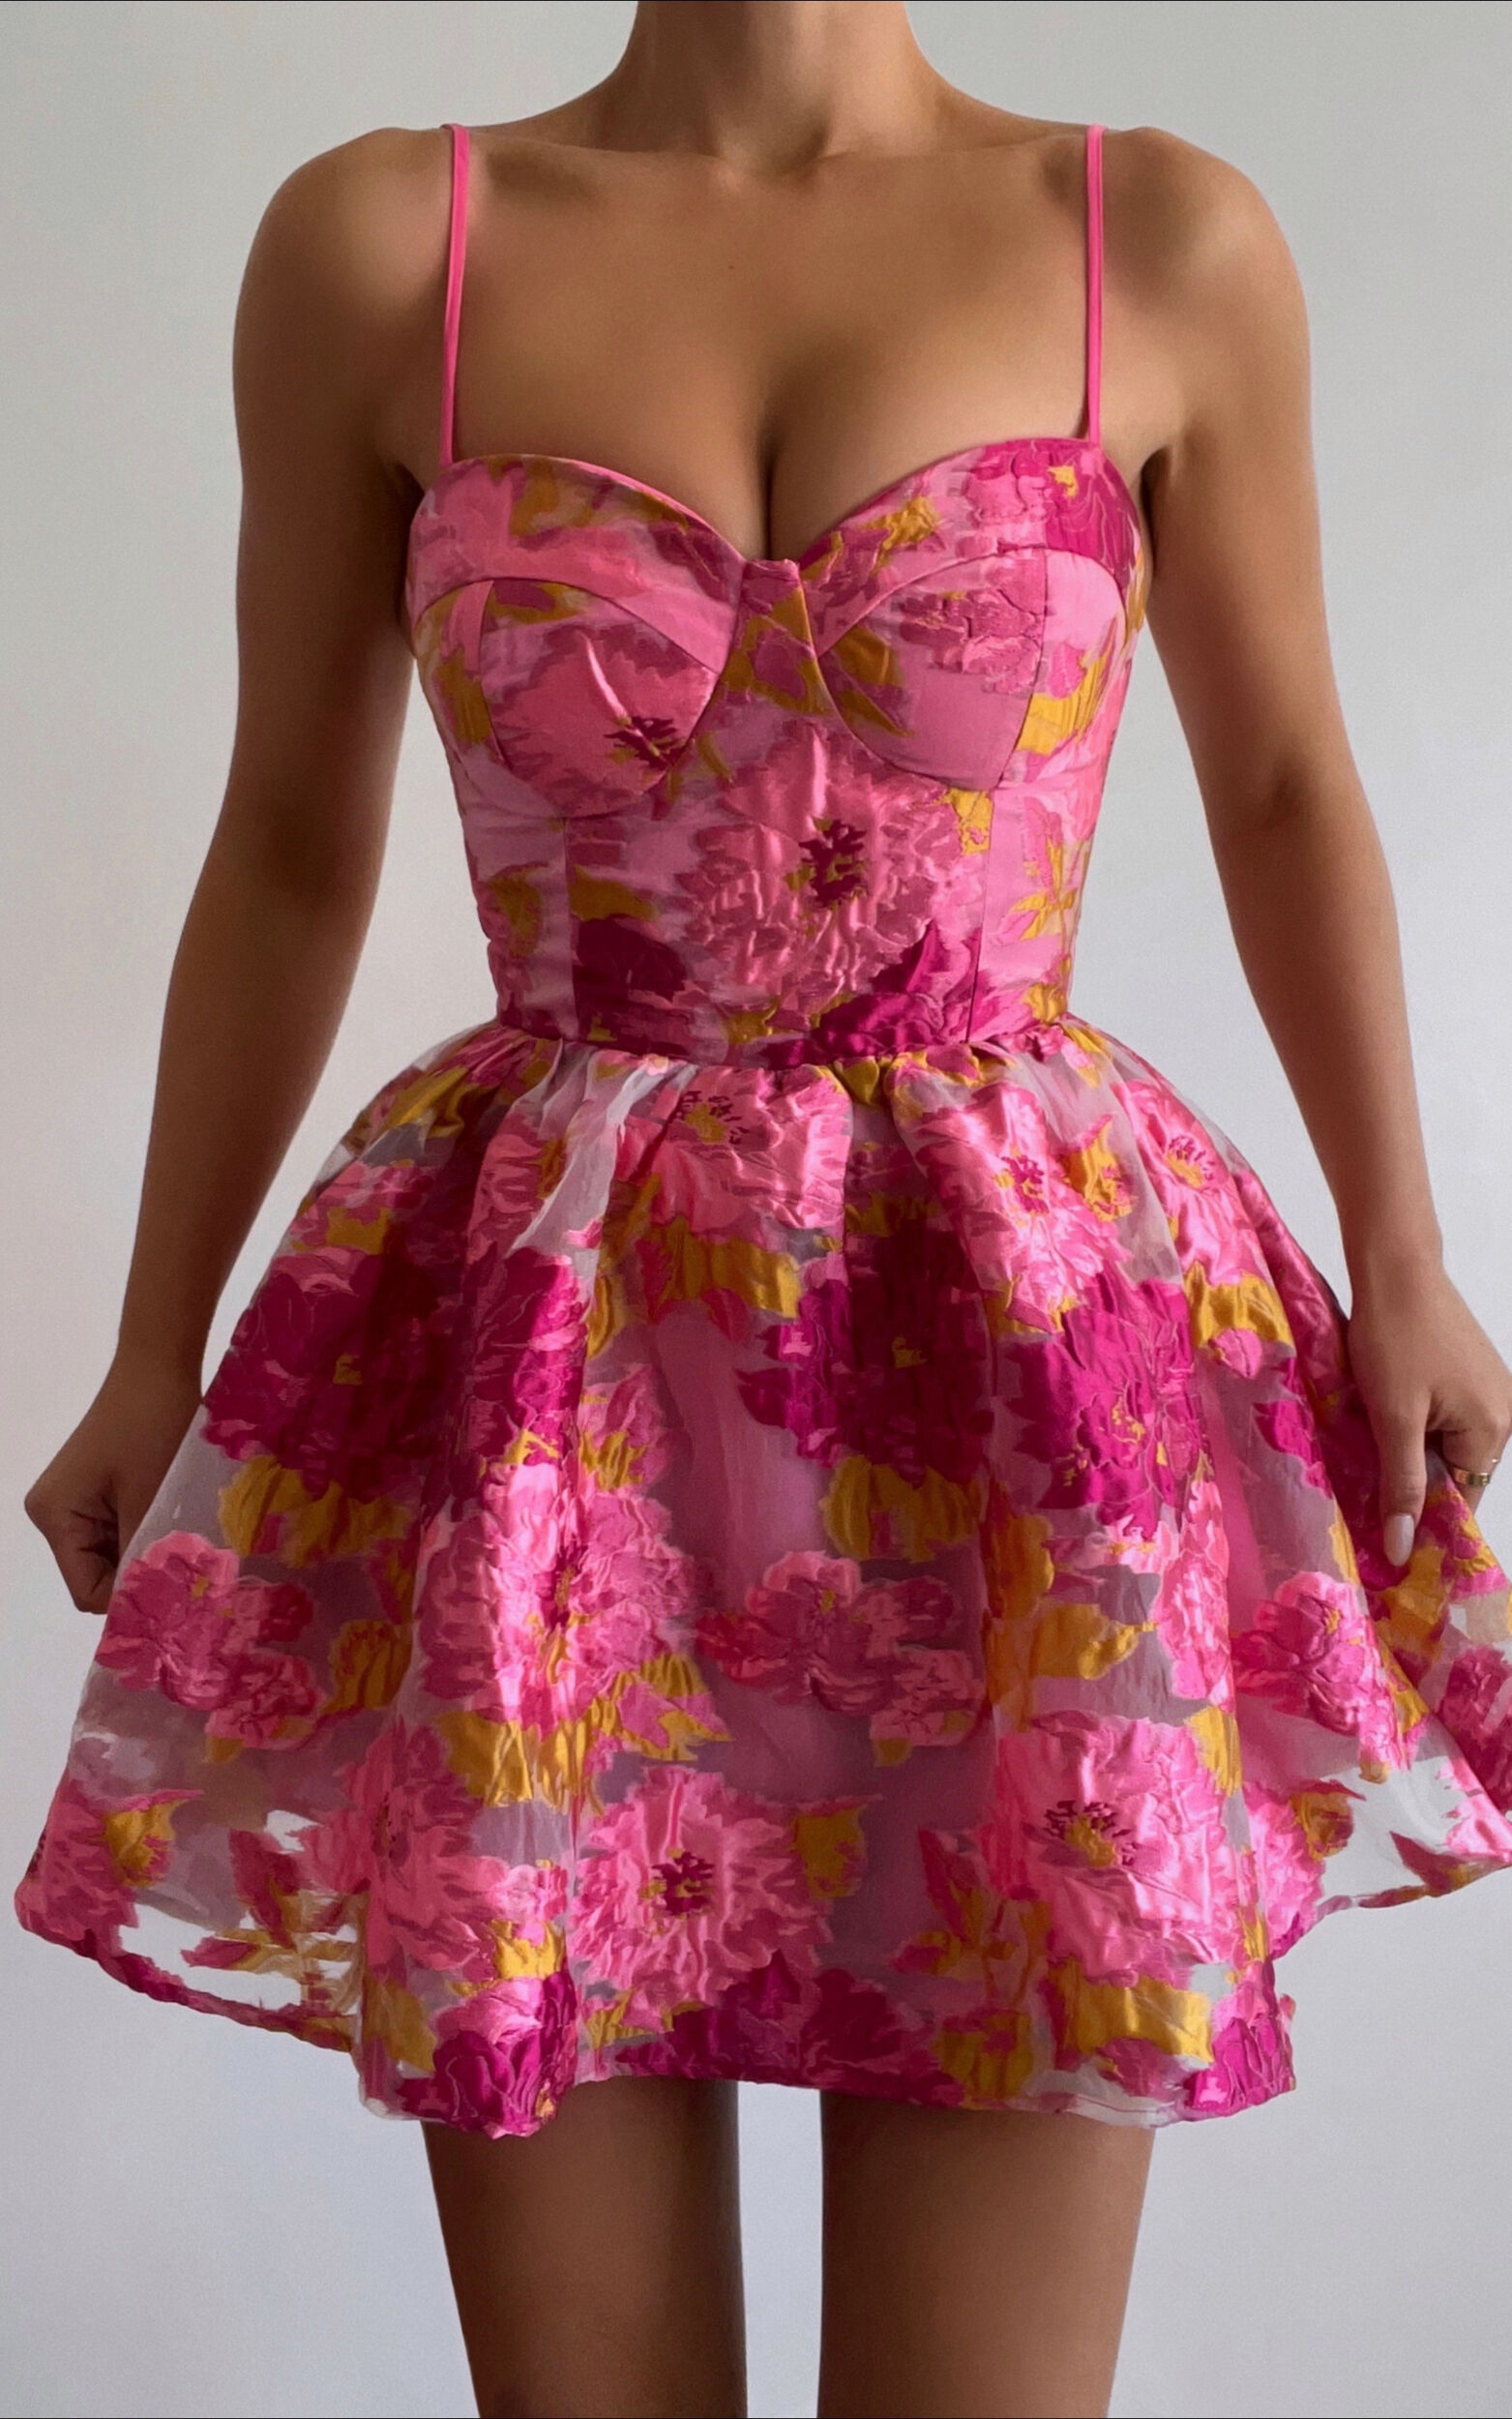 Brailey Mini Dress - Sweetheart Bustier Dress in Pink Jacquard - 06, PNK1, super-hi-res image number null